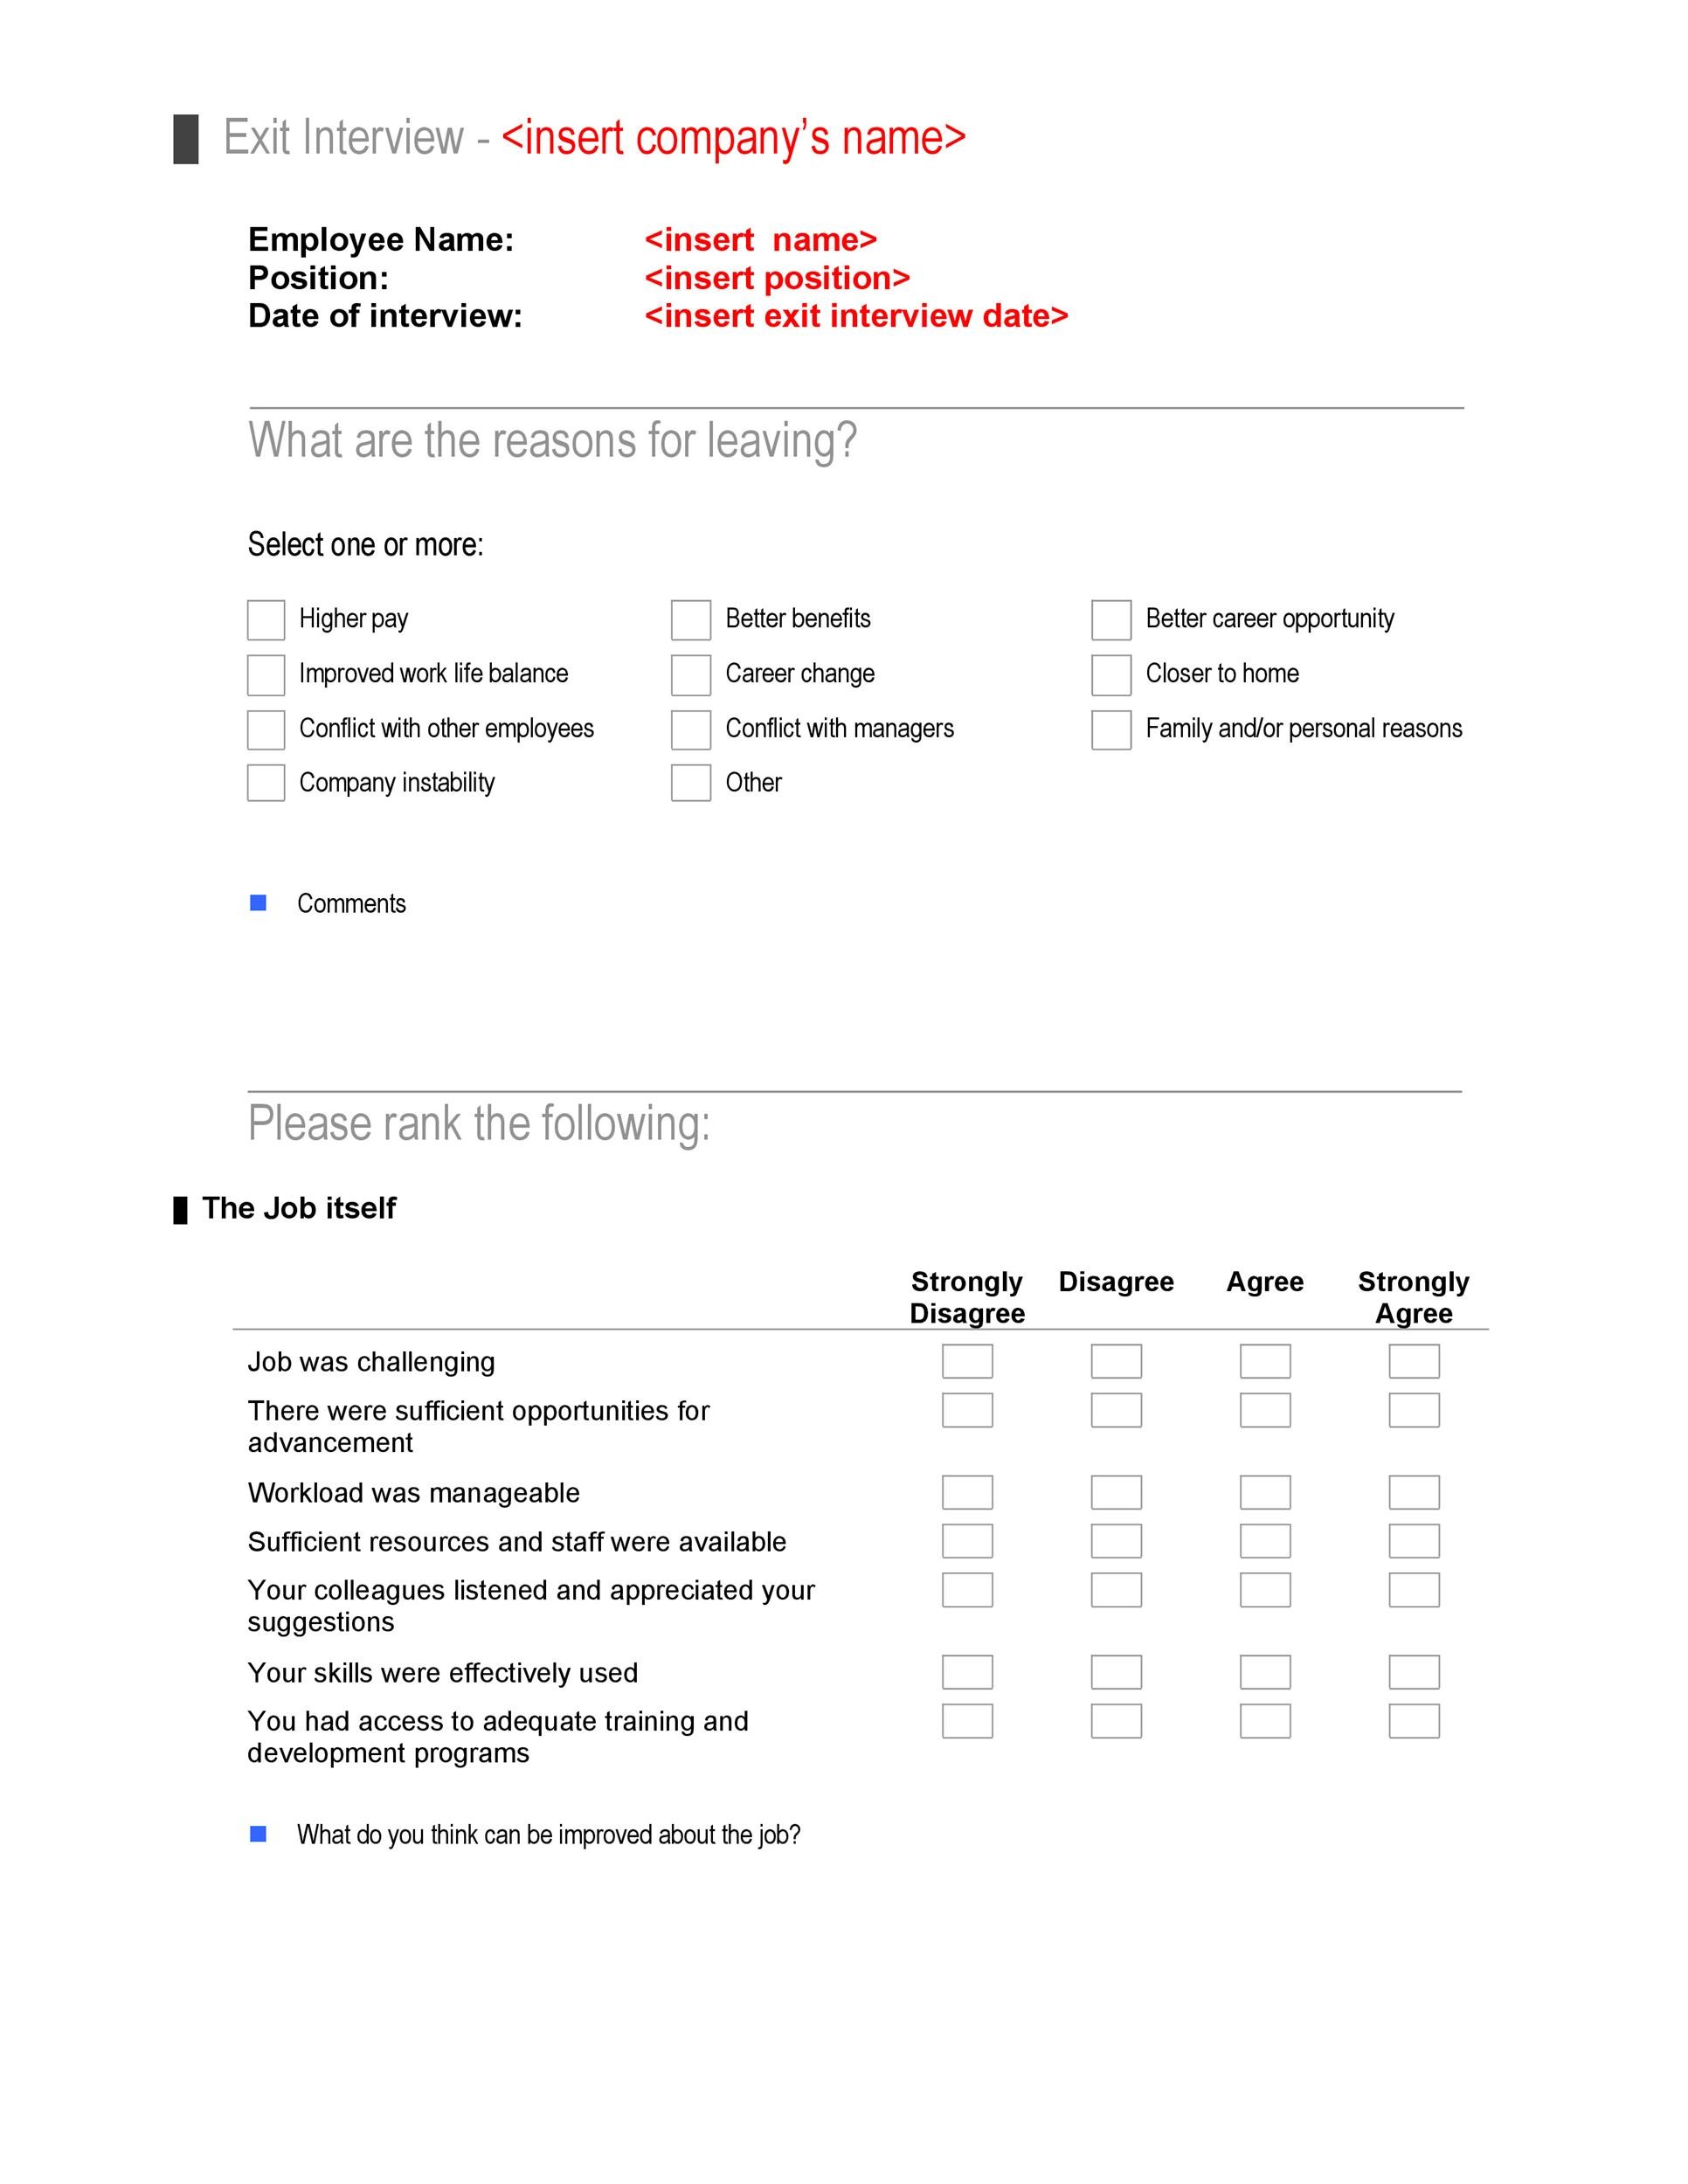 40 Best Exit Interview Templates & Forms ᐅ TemplateLab